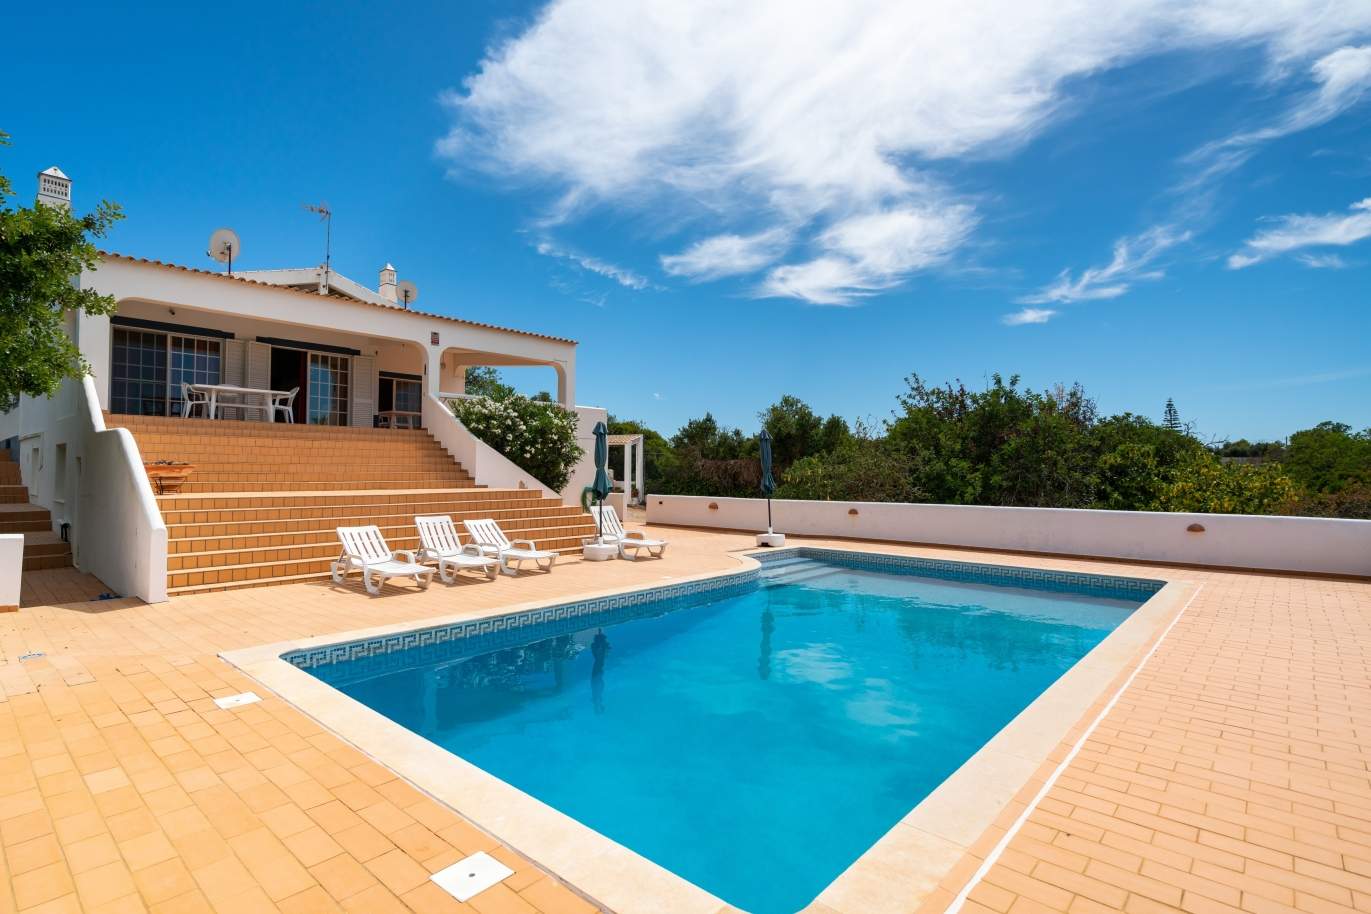 4 Bedroom Villa with Swimming Pool, for sale, Quelfes, Olhão, Algarve_144160